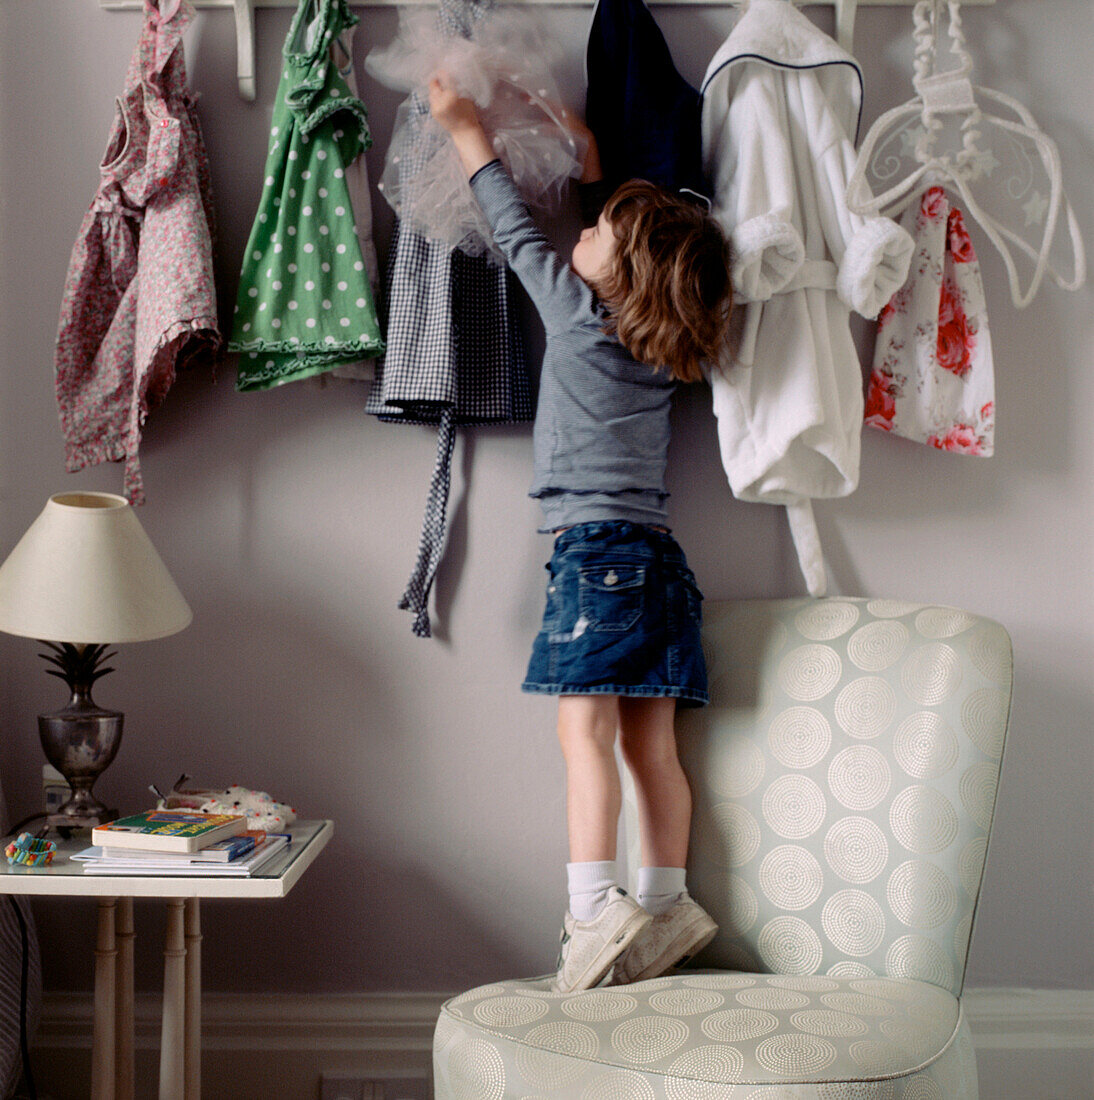 Child standing on a chair reaching for her dressing up clothes